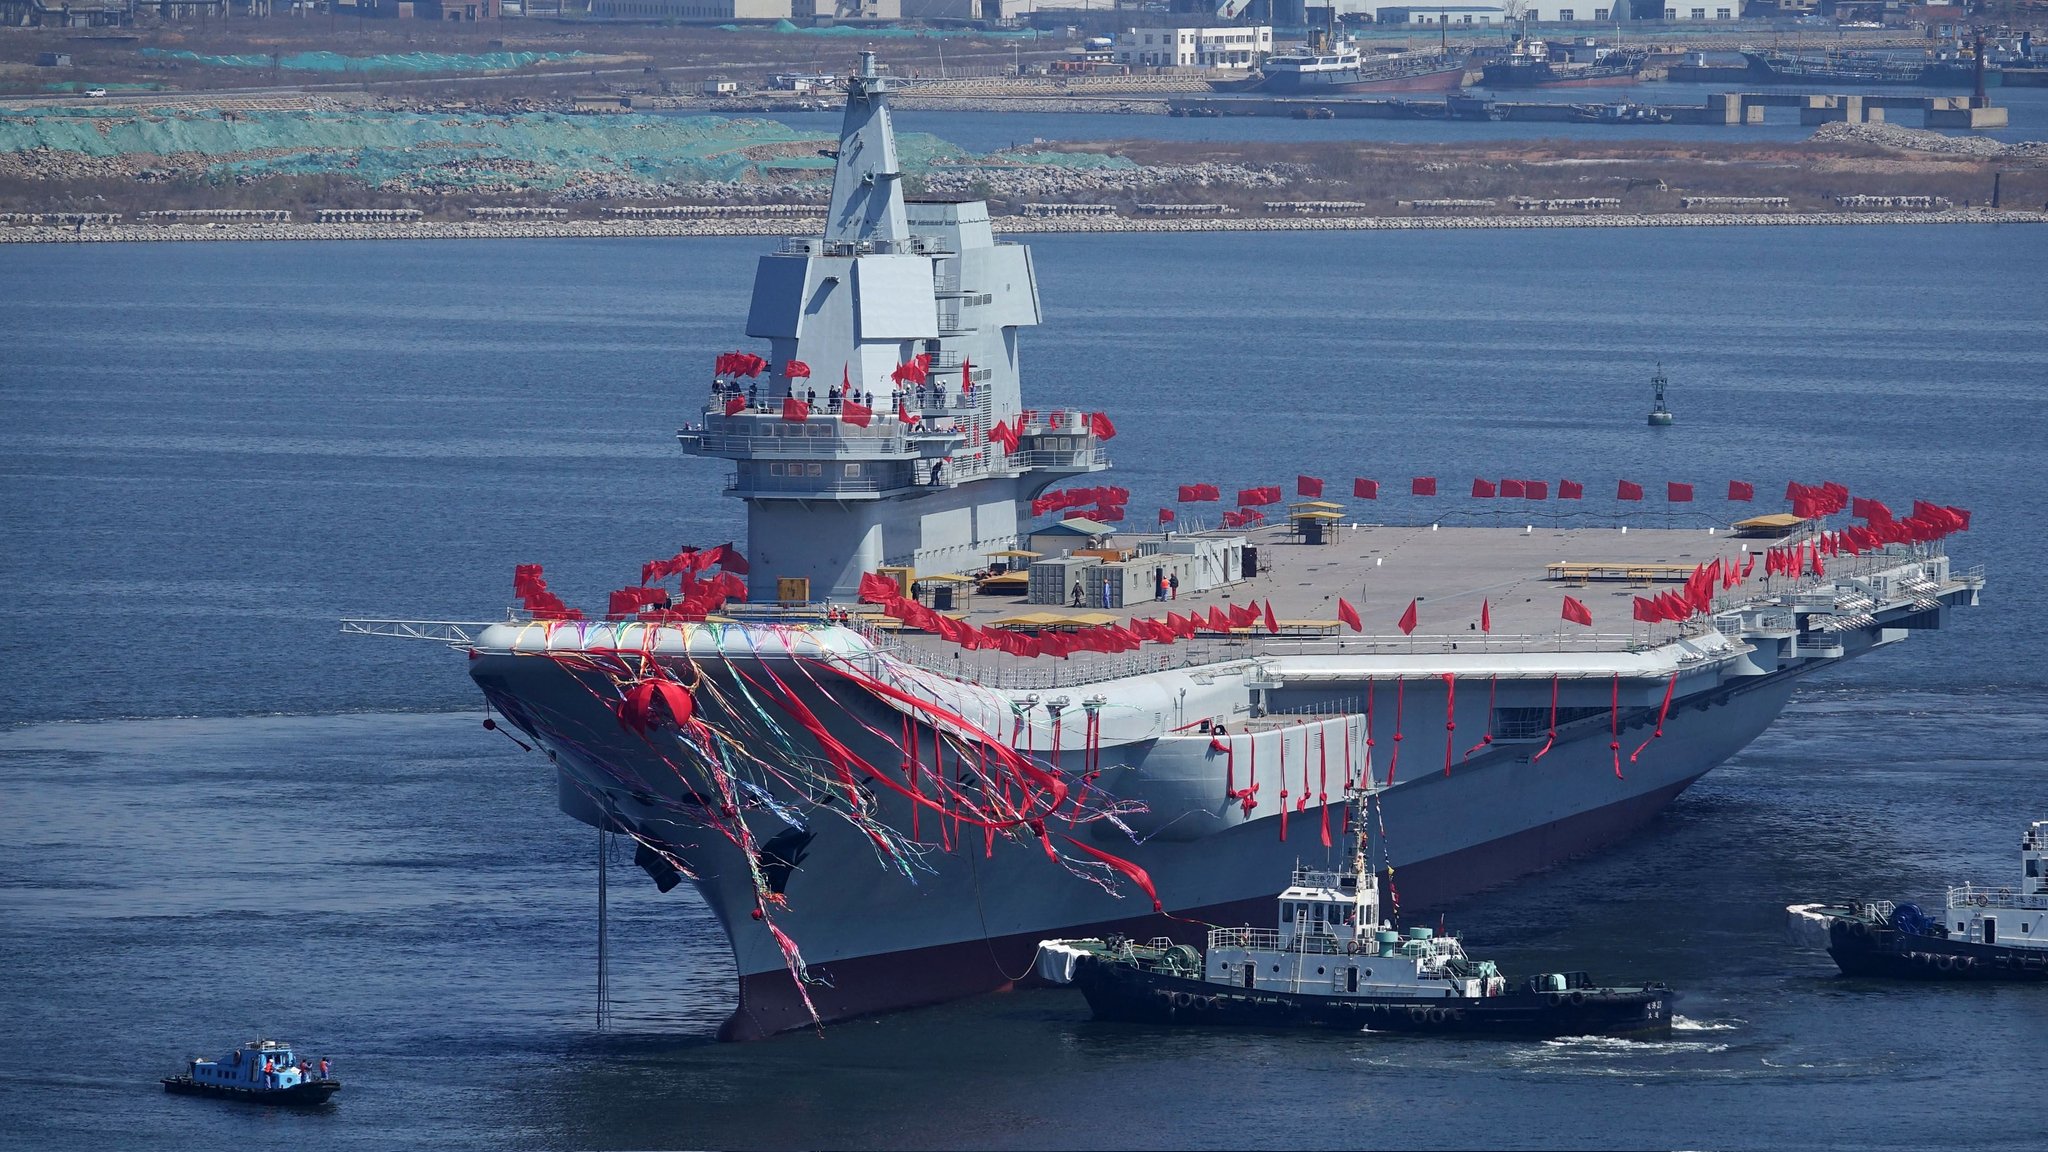 OSINT Updates ? on Twitter: "? China's second aircraft carrier the Shandong recently set out for realistic combat-oriented drills in the South China Sea https://t.co/d6nrJhuhGJ" / Twitter